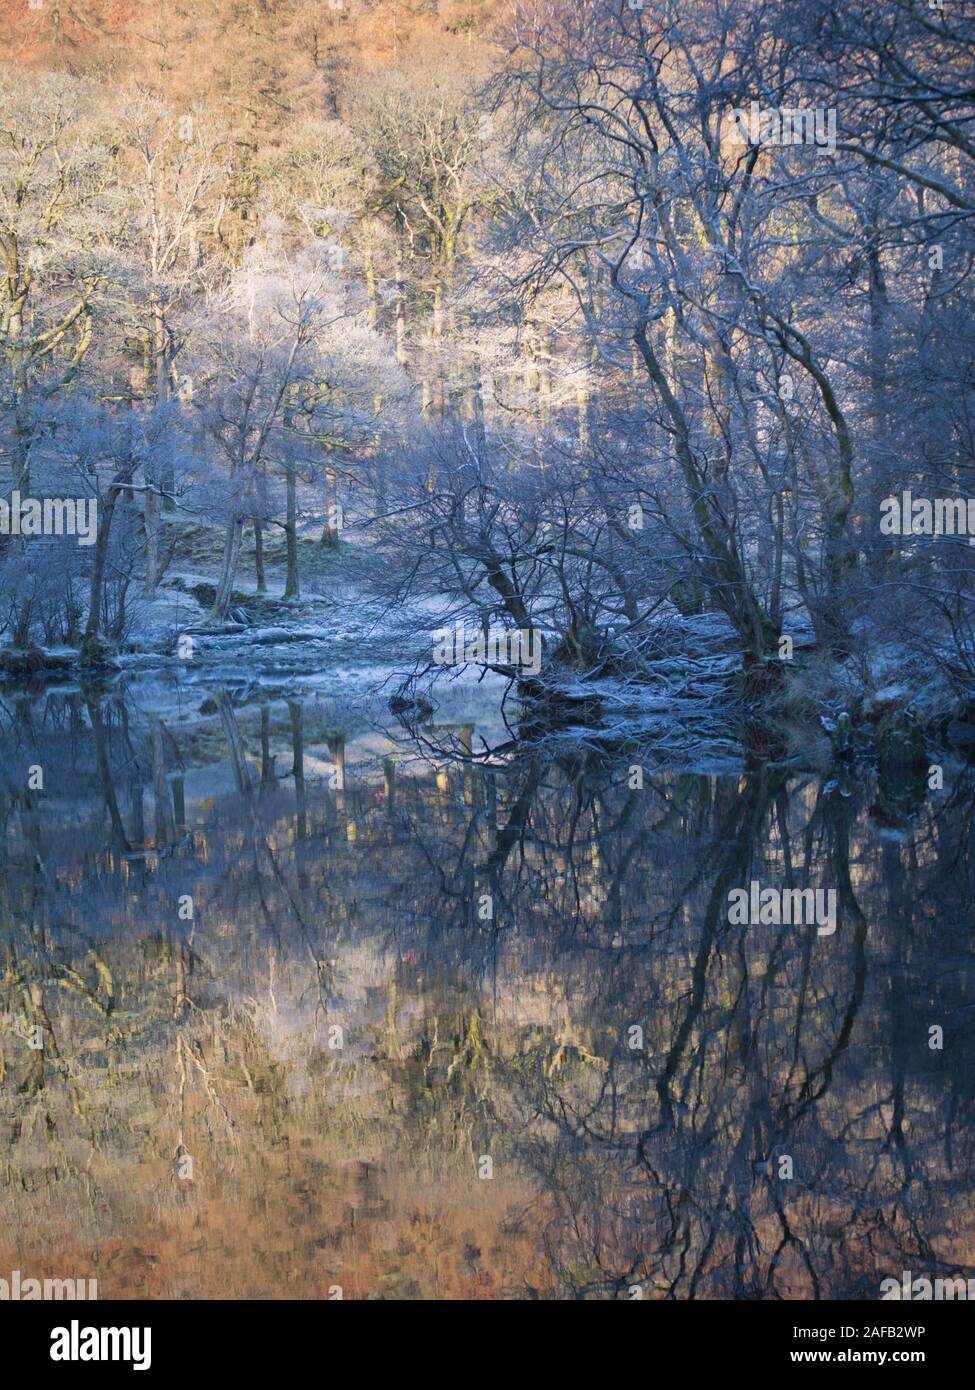 Reflections of trees on the River Derwent with hoar frost laced trees on a winter's day in Borrowdale, the Lake District, Cumbria, England. Stock Photo